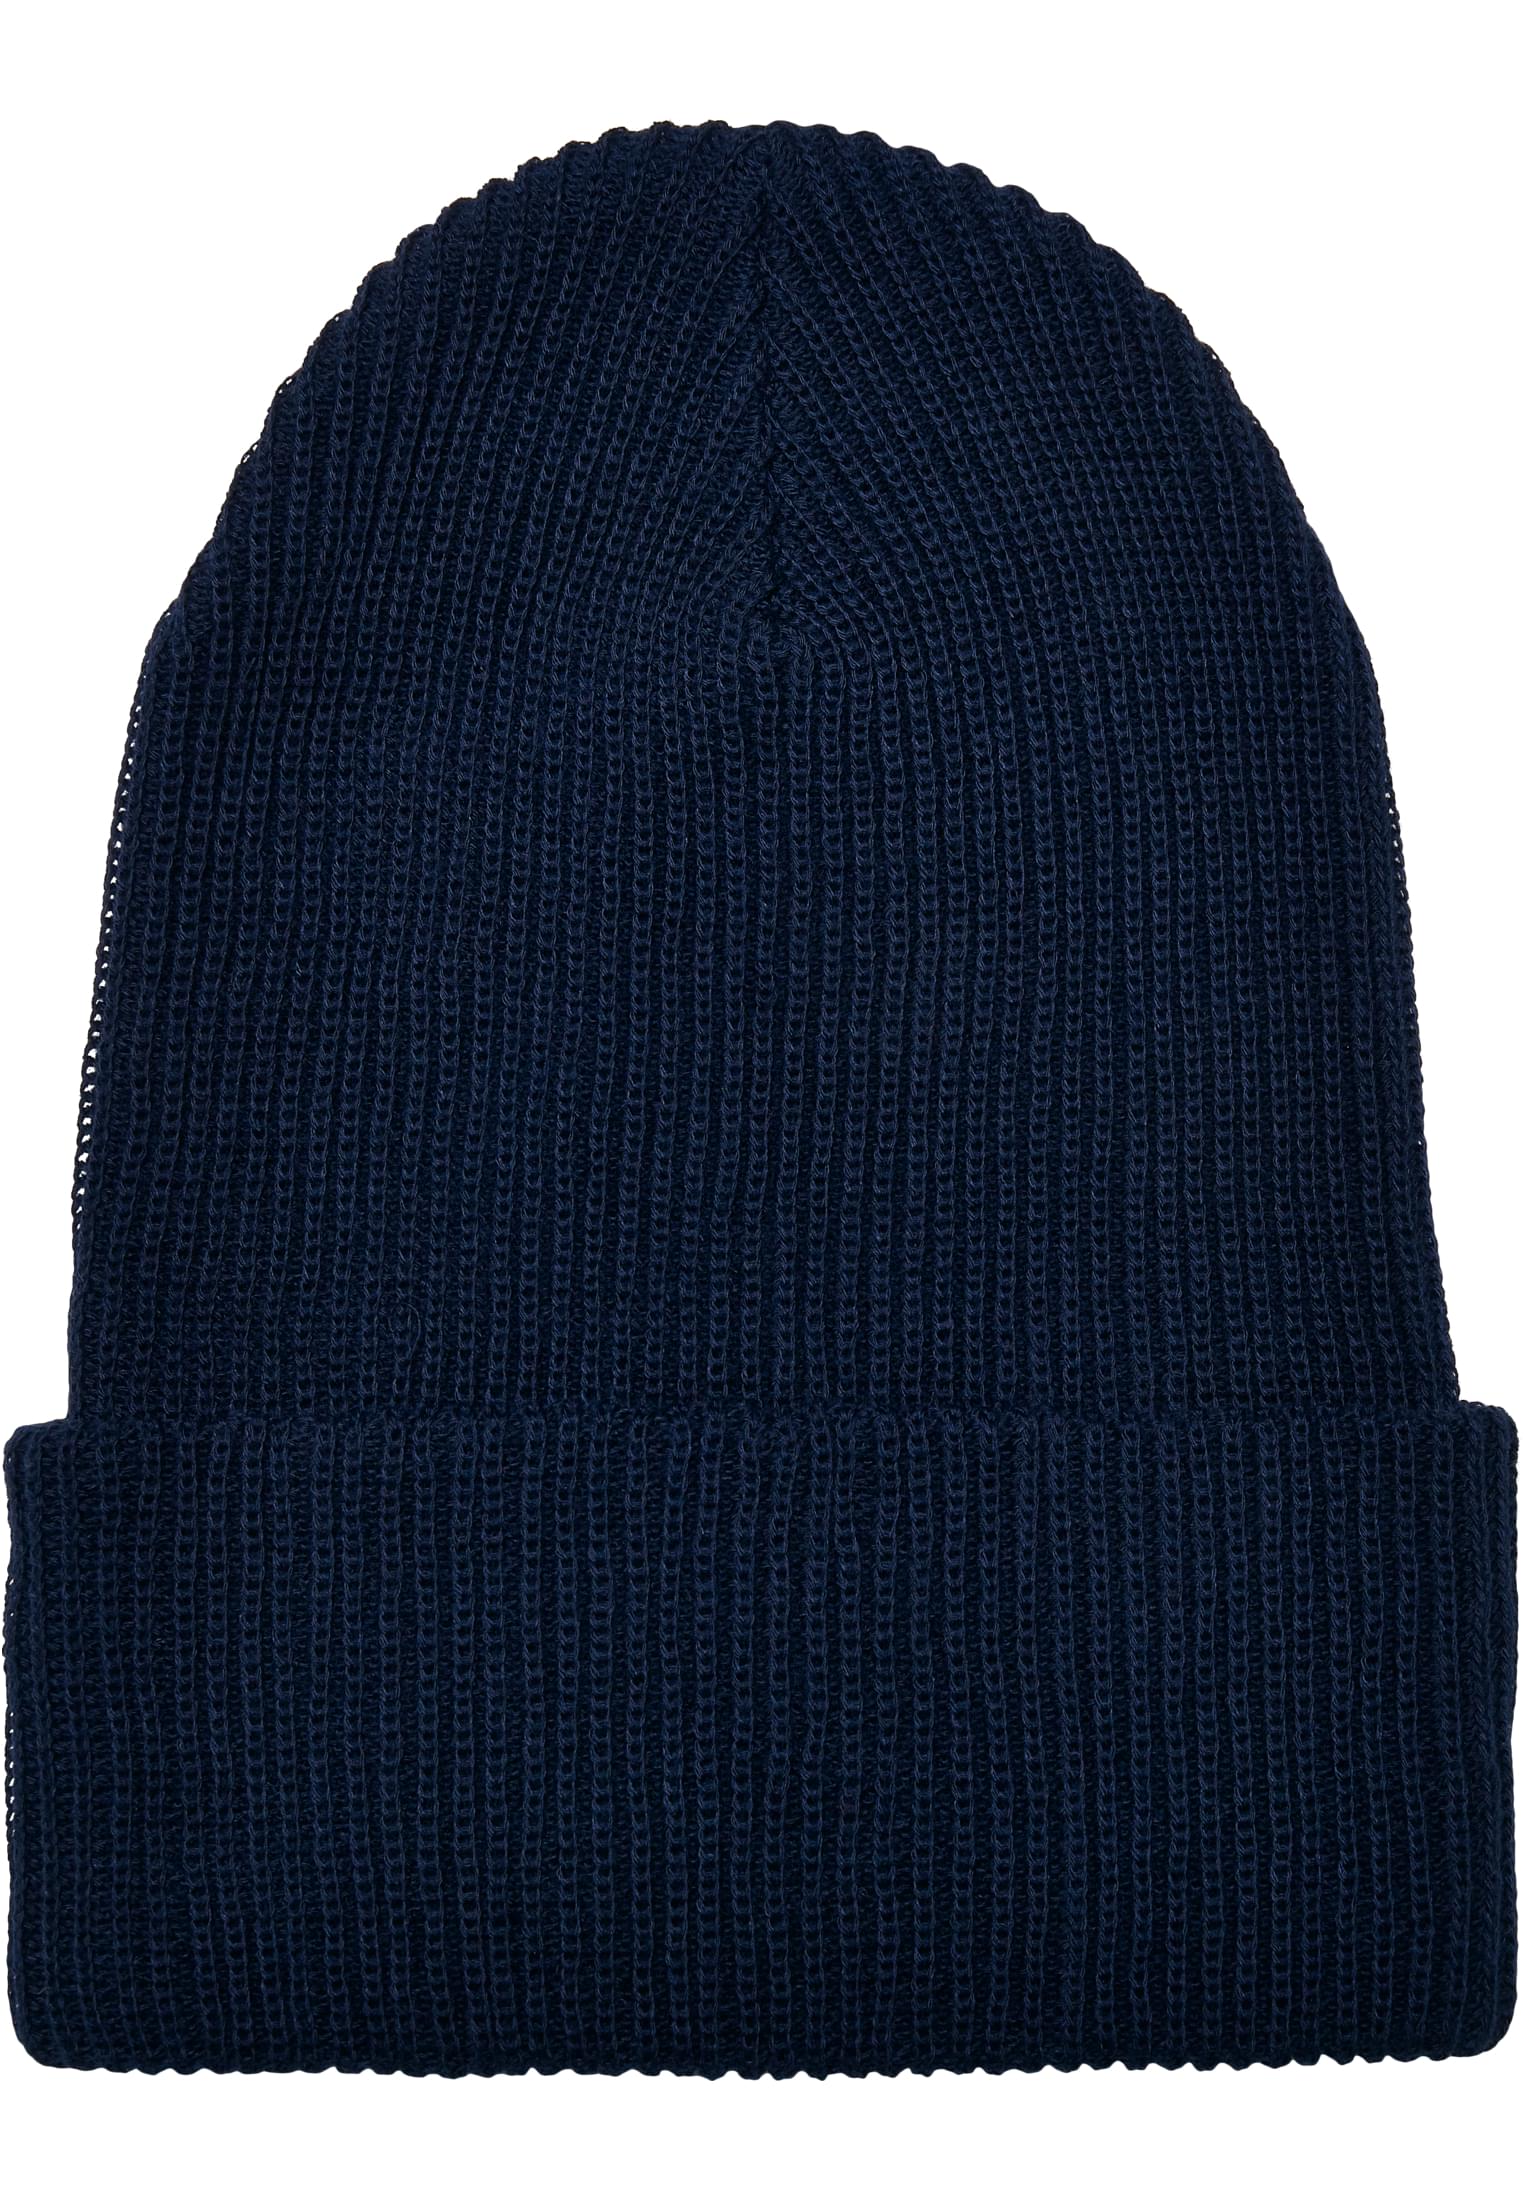 Recycled yarn beanie with ribbed knit in a nautical style